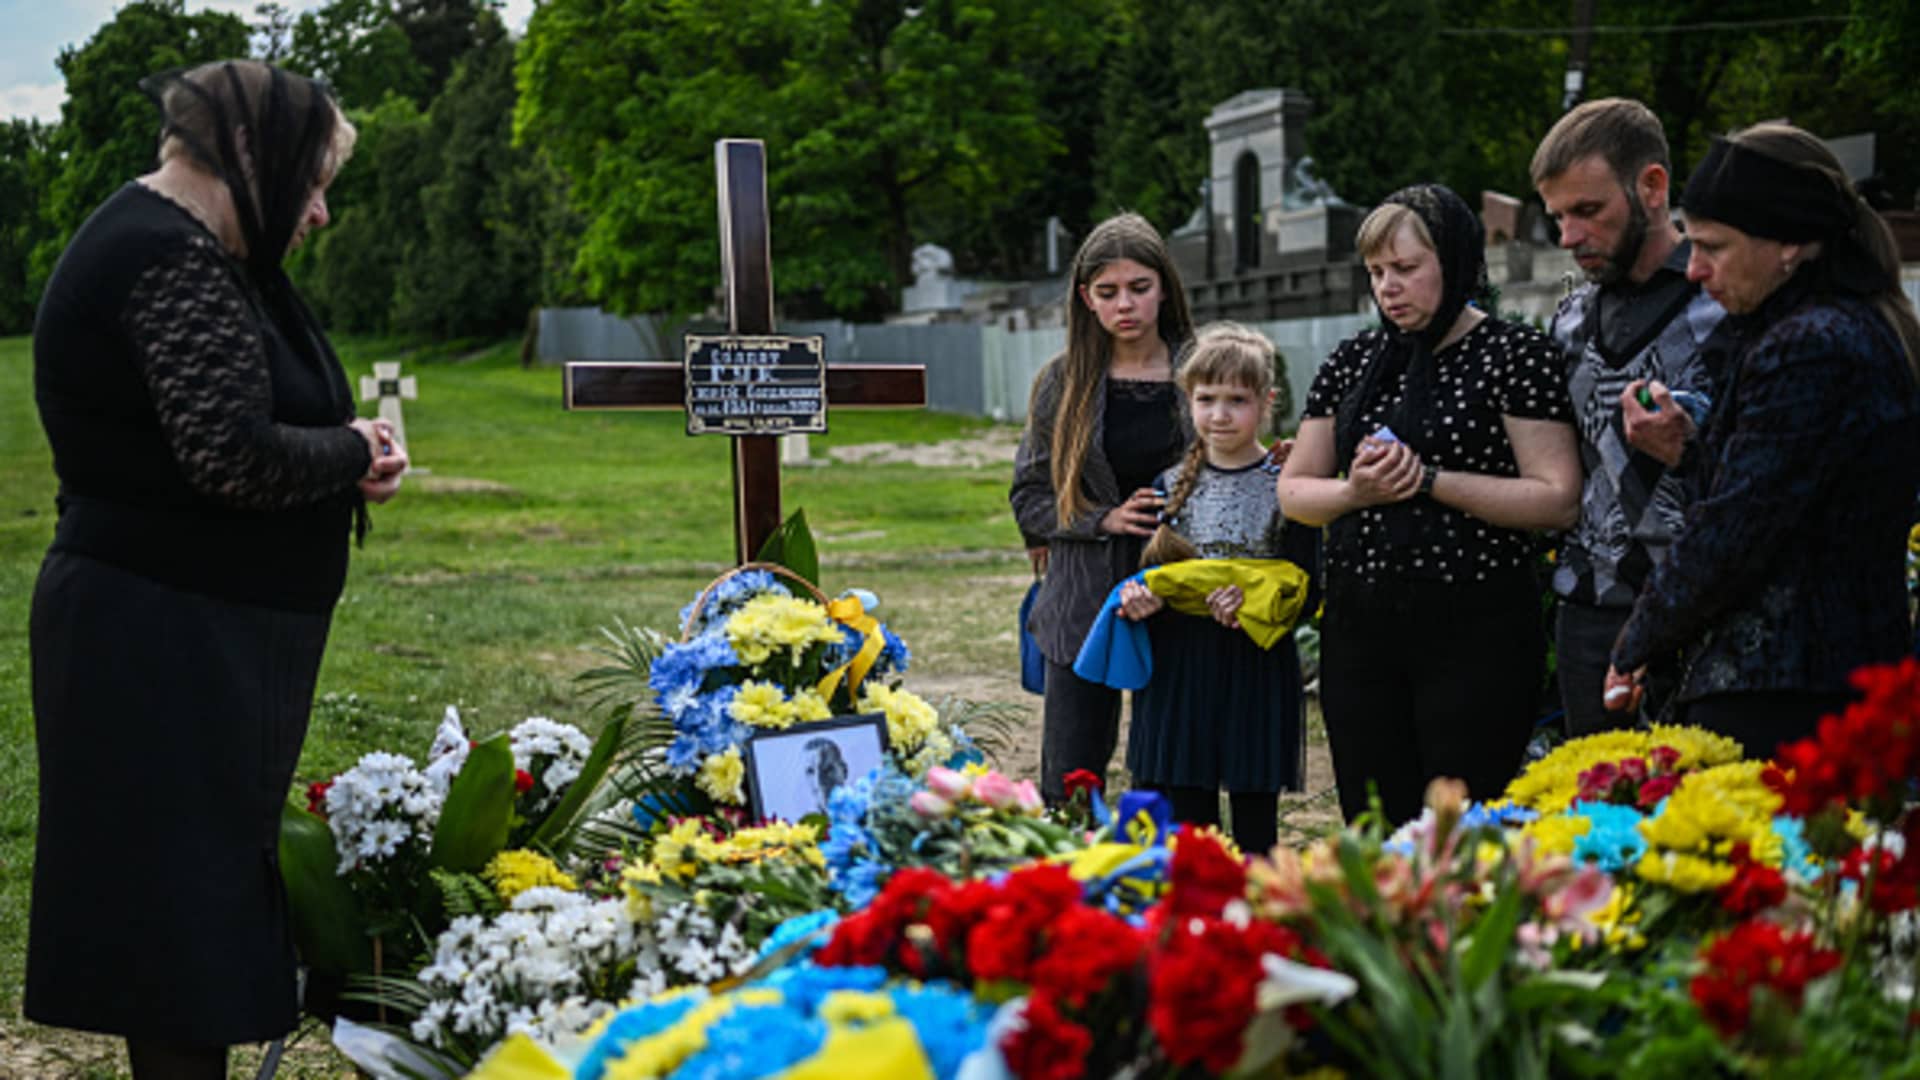 Relatives of the fallen soldier Yurii Huk, age 41 pay their respects by his grave at the Field of Mars of Lychakiv cemetery in Lviv, Ukraine on May 16, 2022.